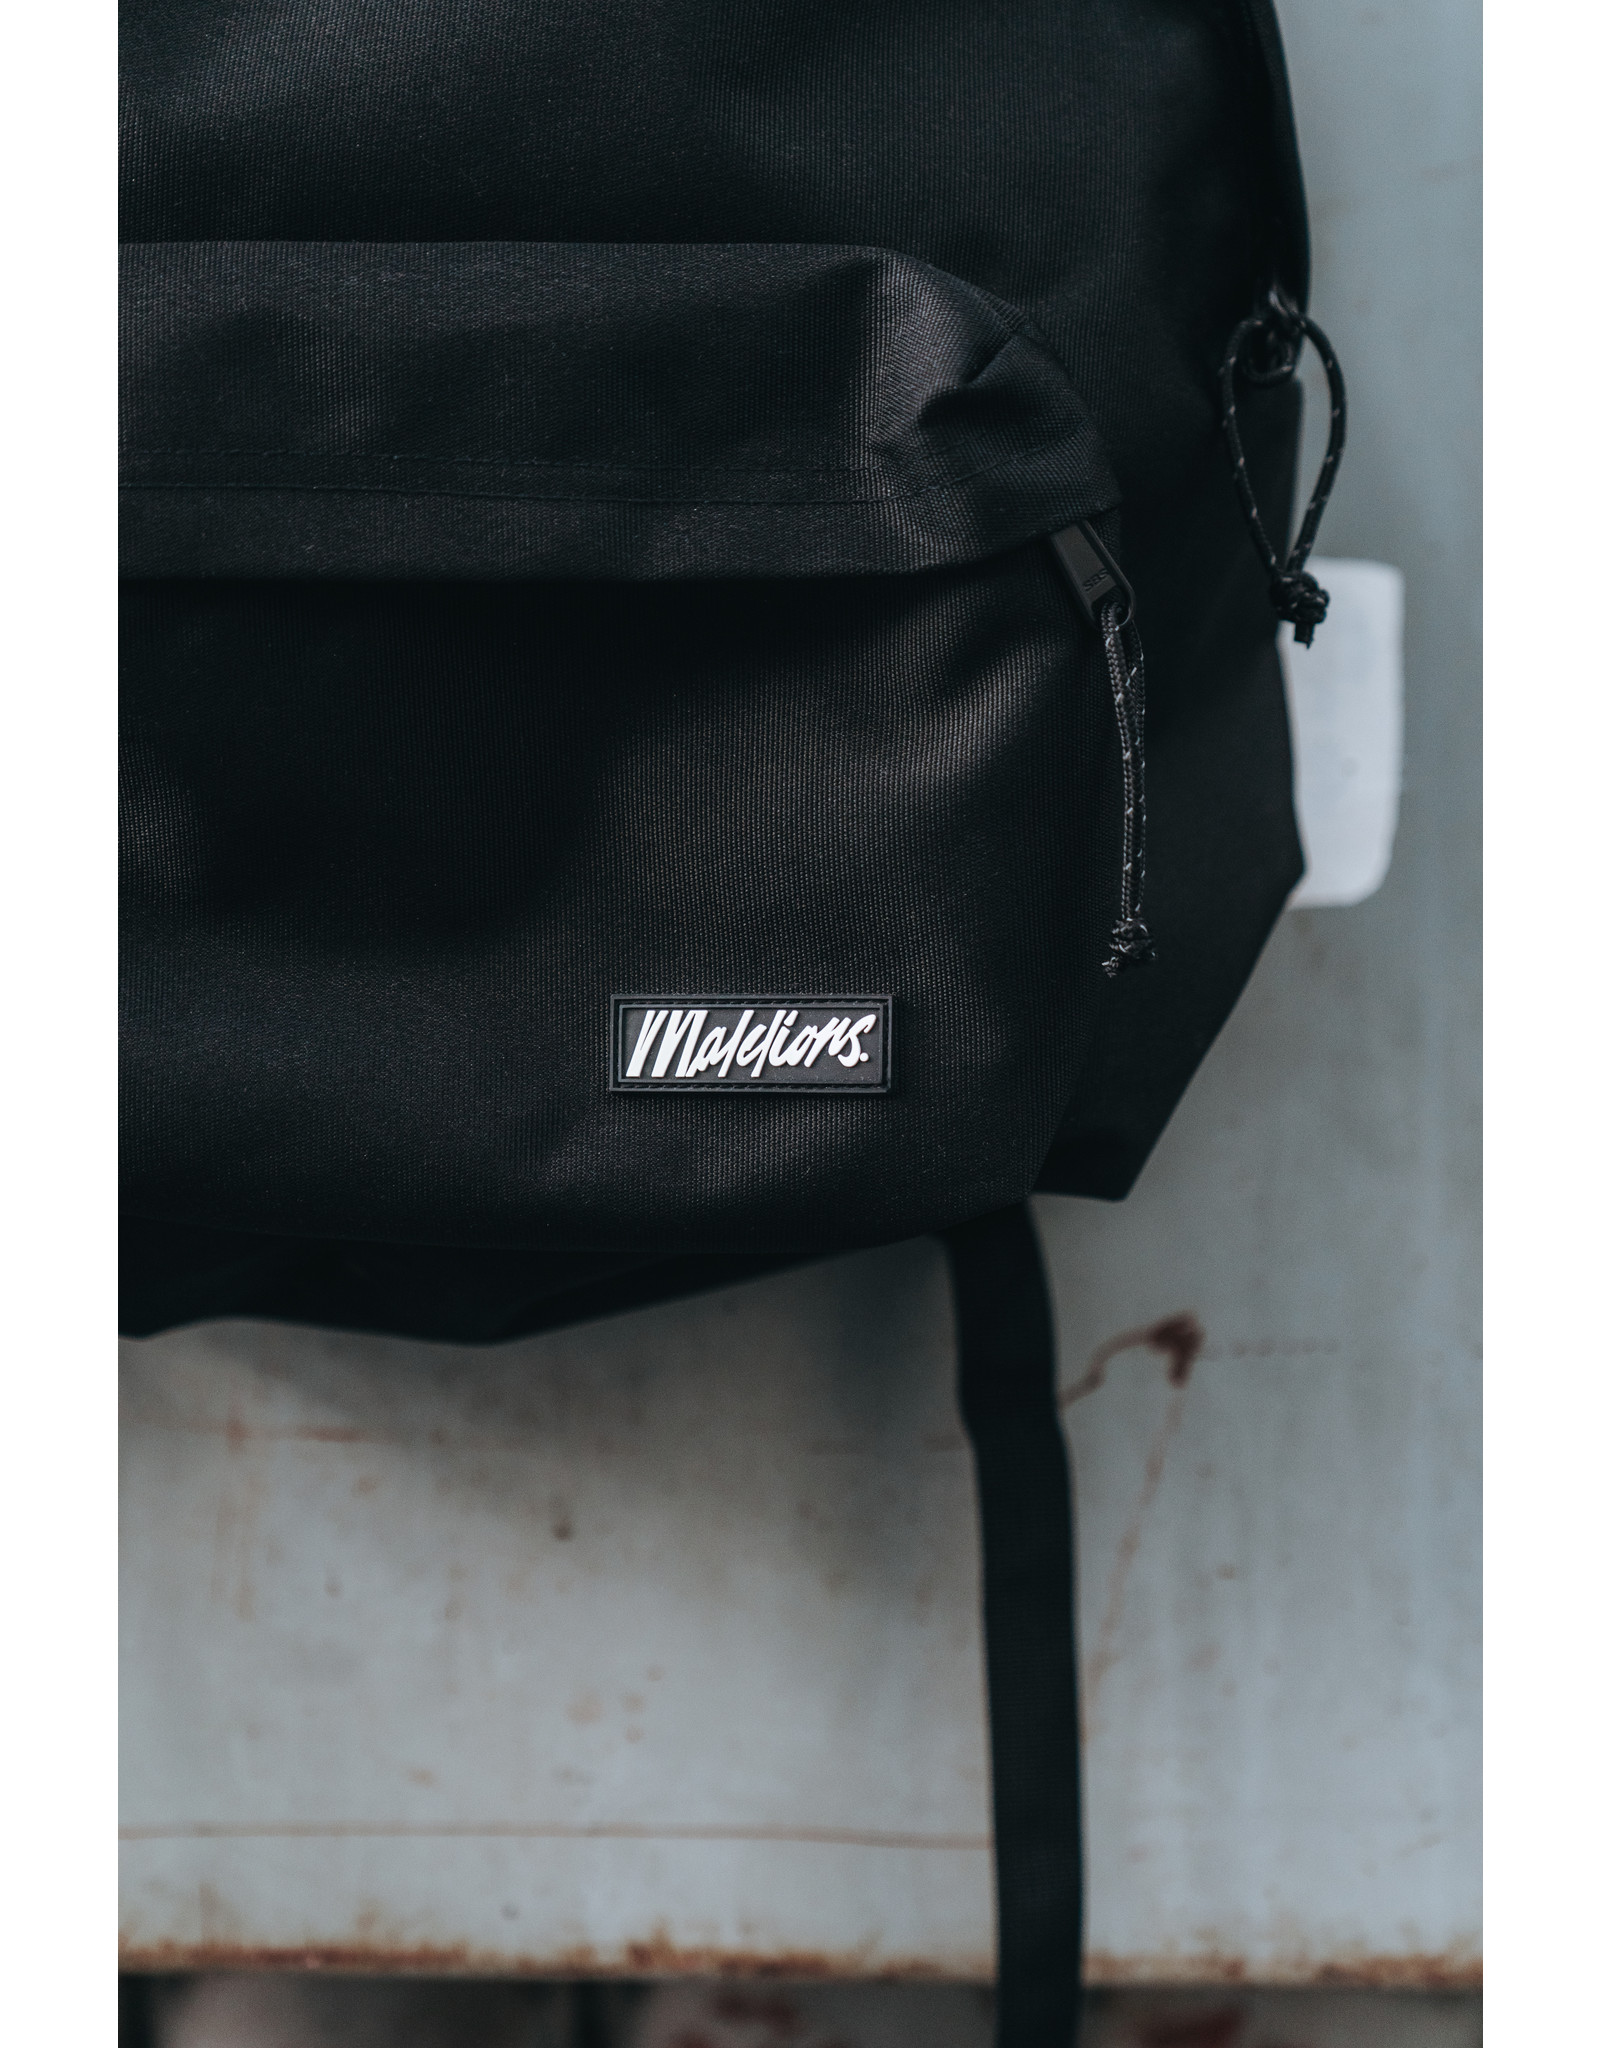 Malelions Junior Patch Backpack Black